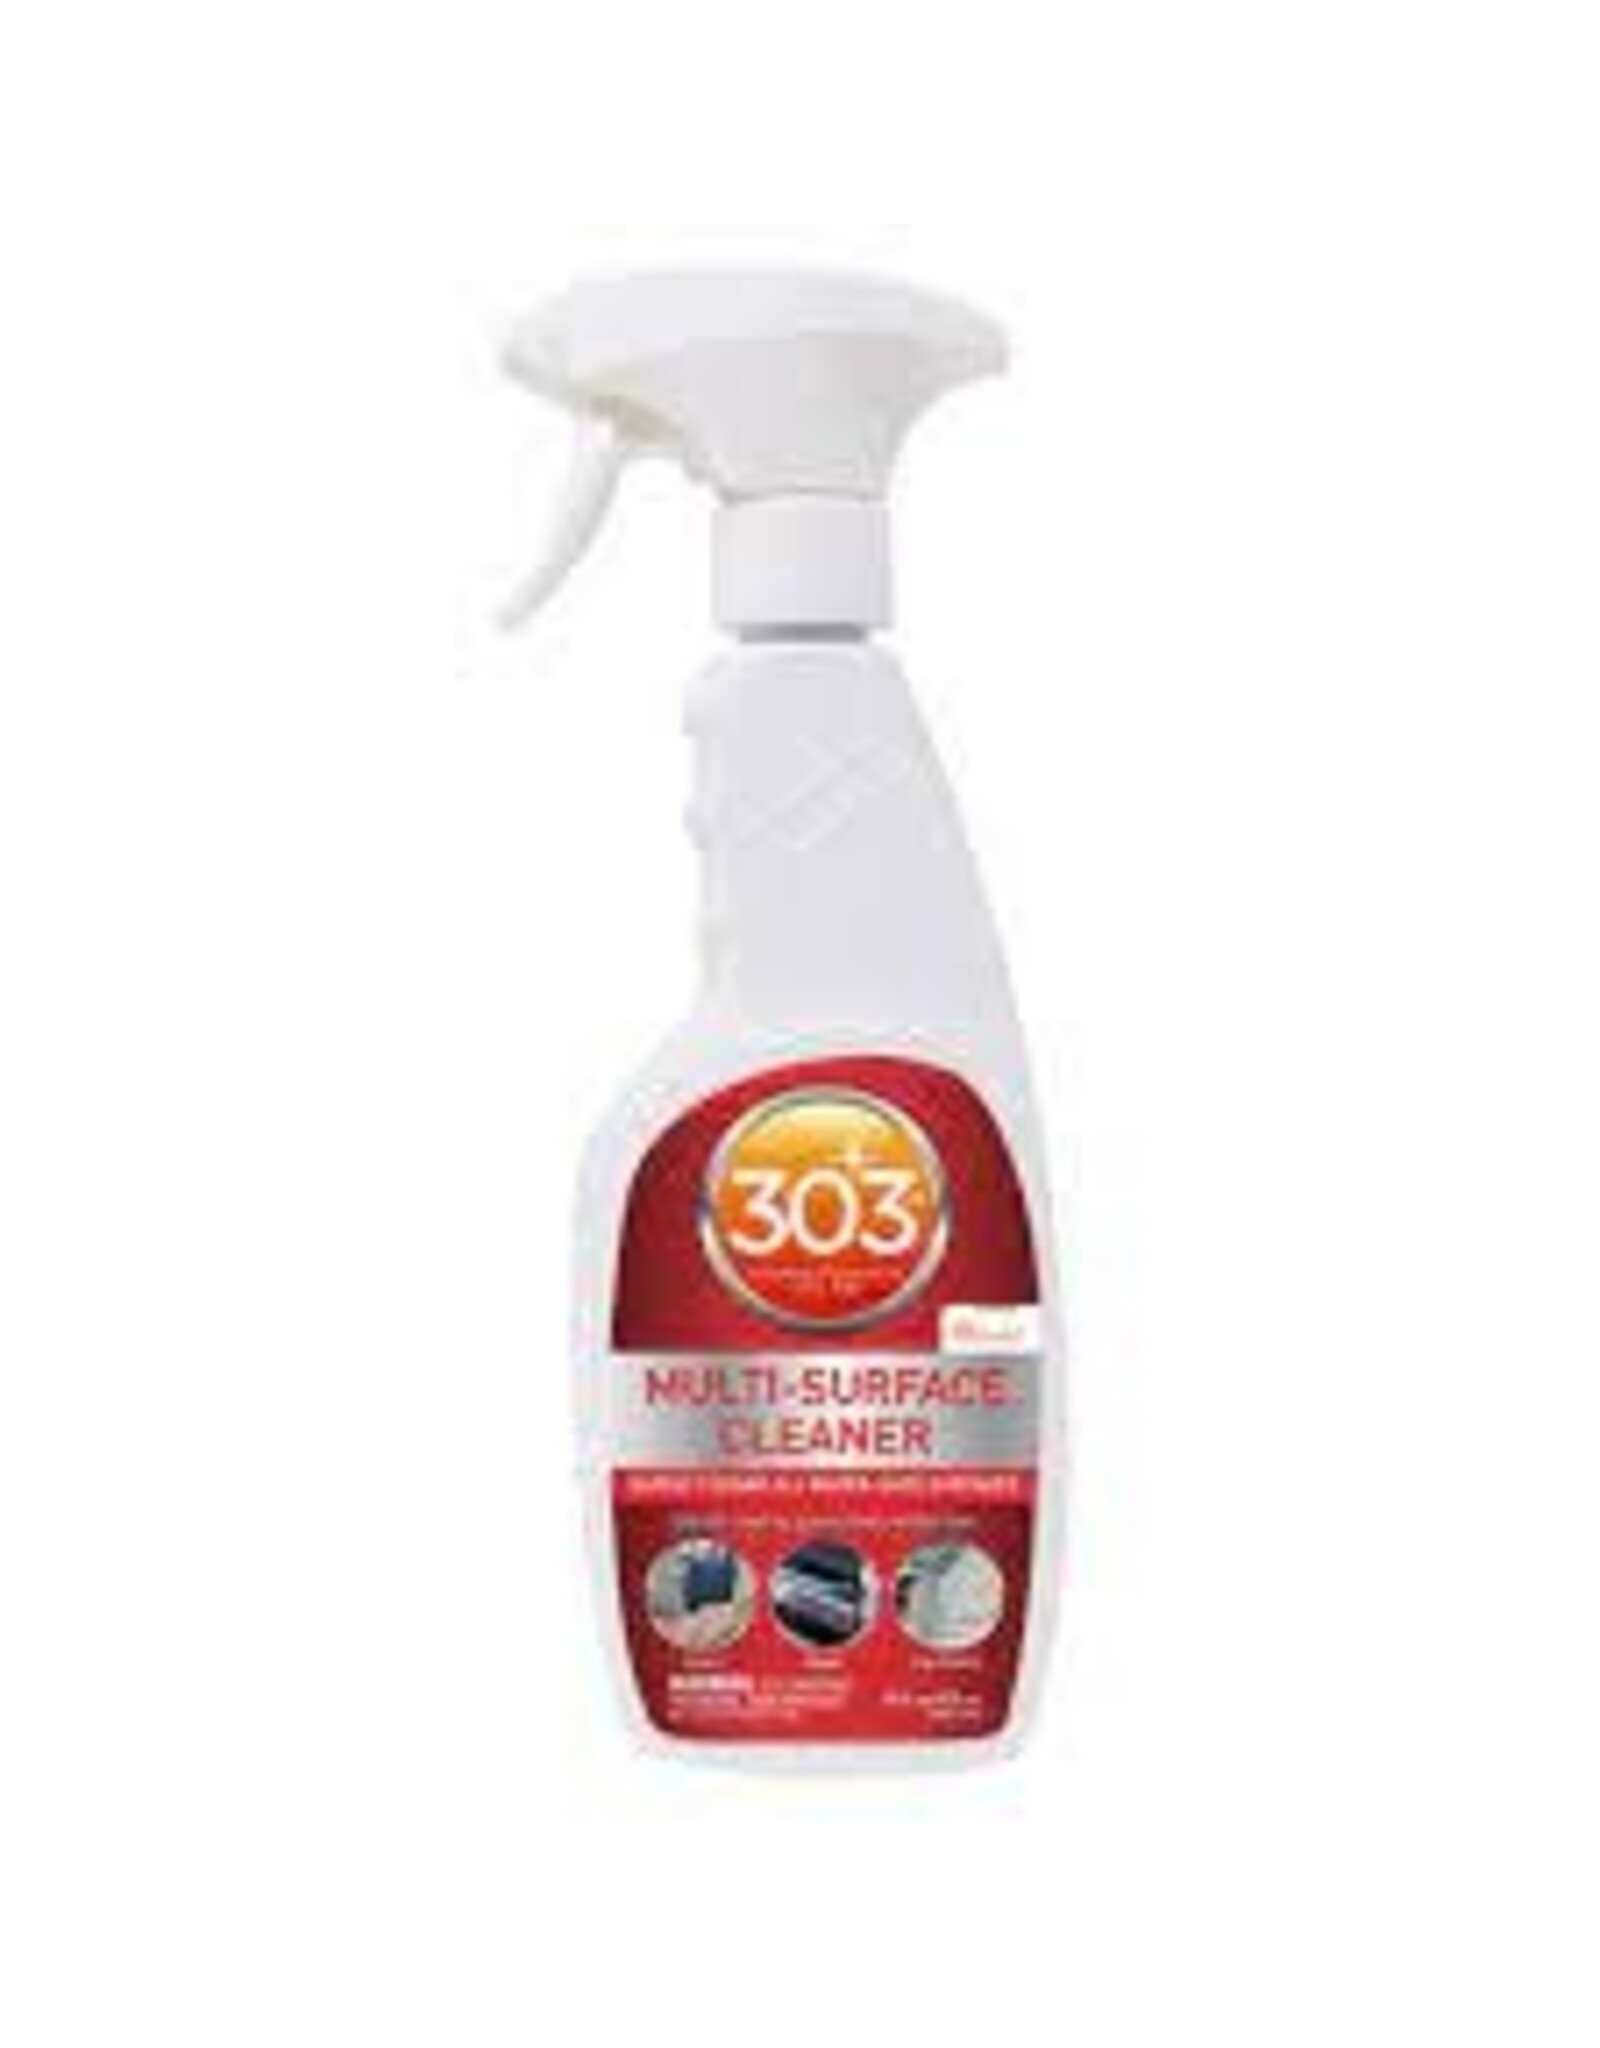 303 303 Multi Surface Cleaner 32oz